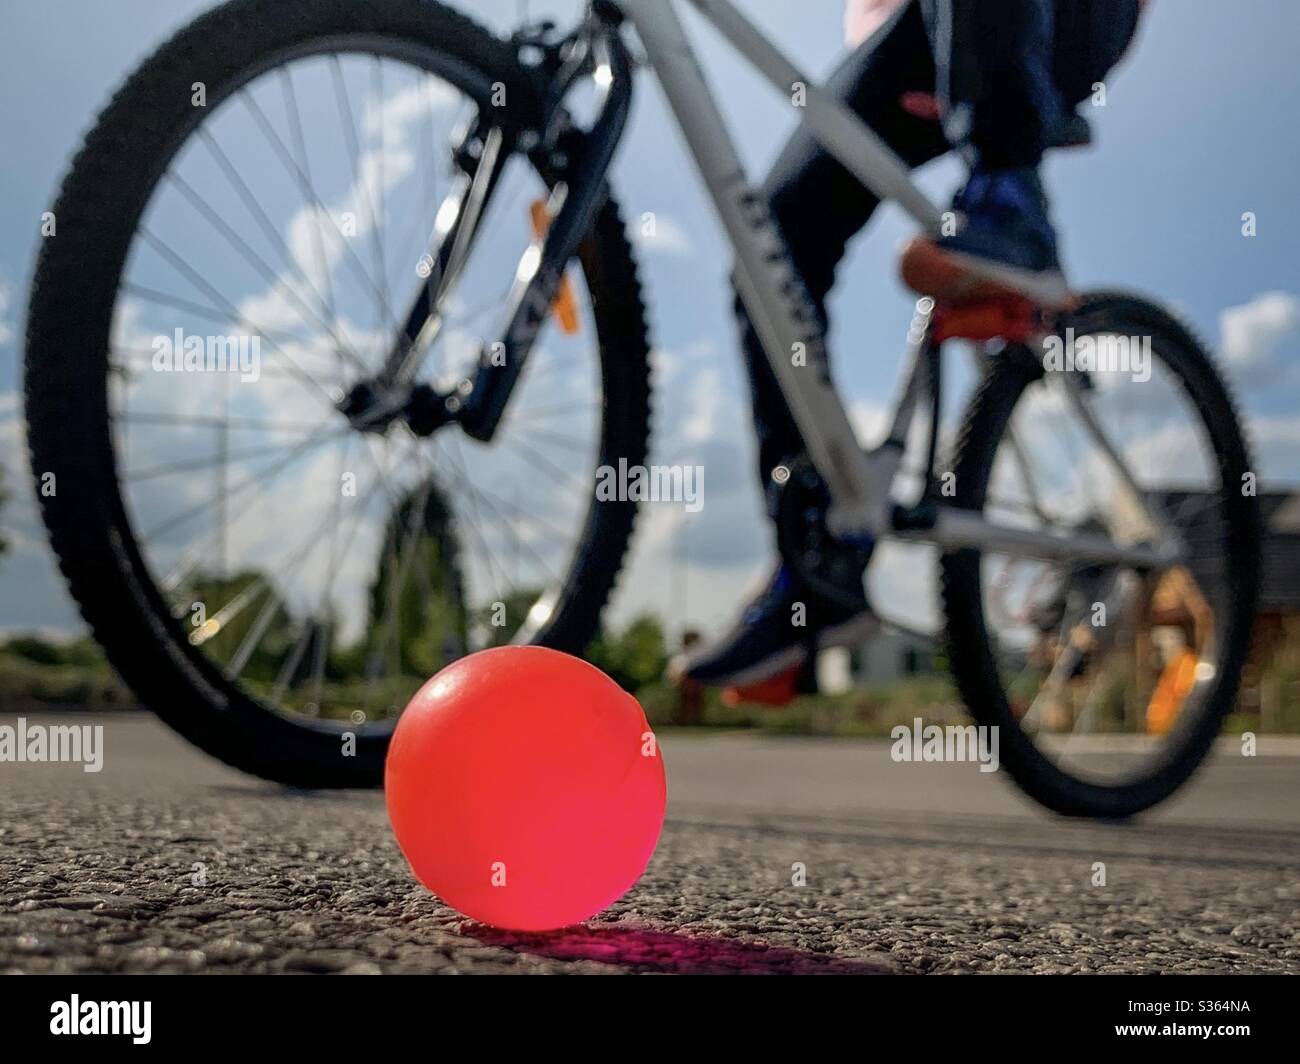 Things for kids to do outside.  Kid with bike and ball.  Outdoor games and activities Stock Photo